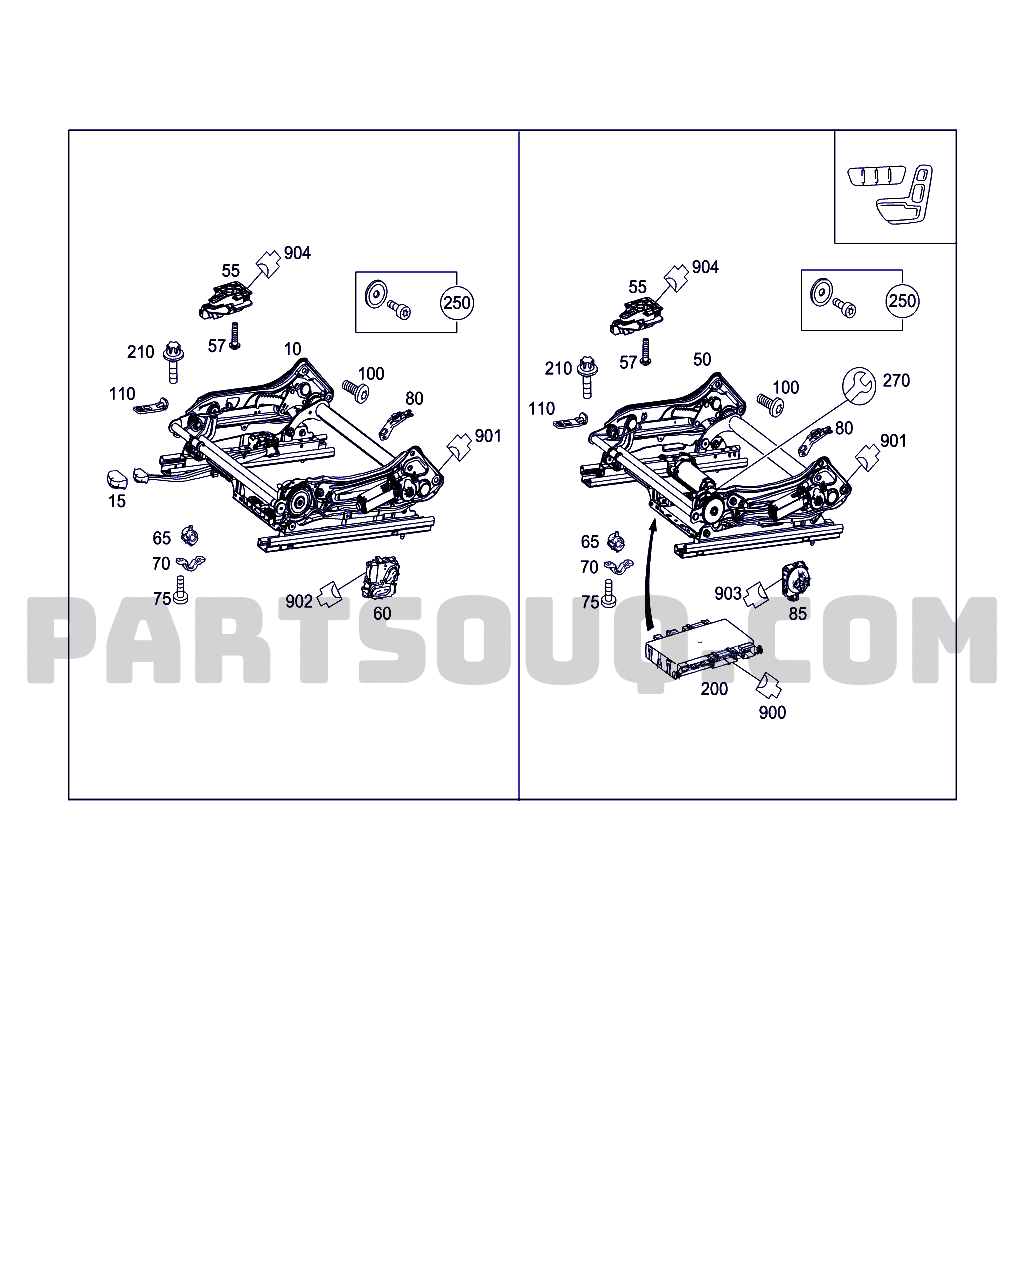 ELECTRICAL EQUIPMENT AND INSTRUMENTS, Mercedes-Benz E 250 CDI 4MATIC  WDD2120821A914740 WDDHF8CB0EA914740, Parts Catalogs